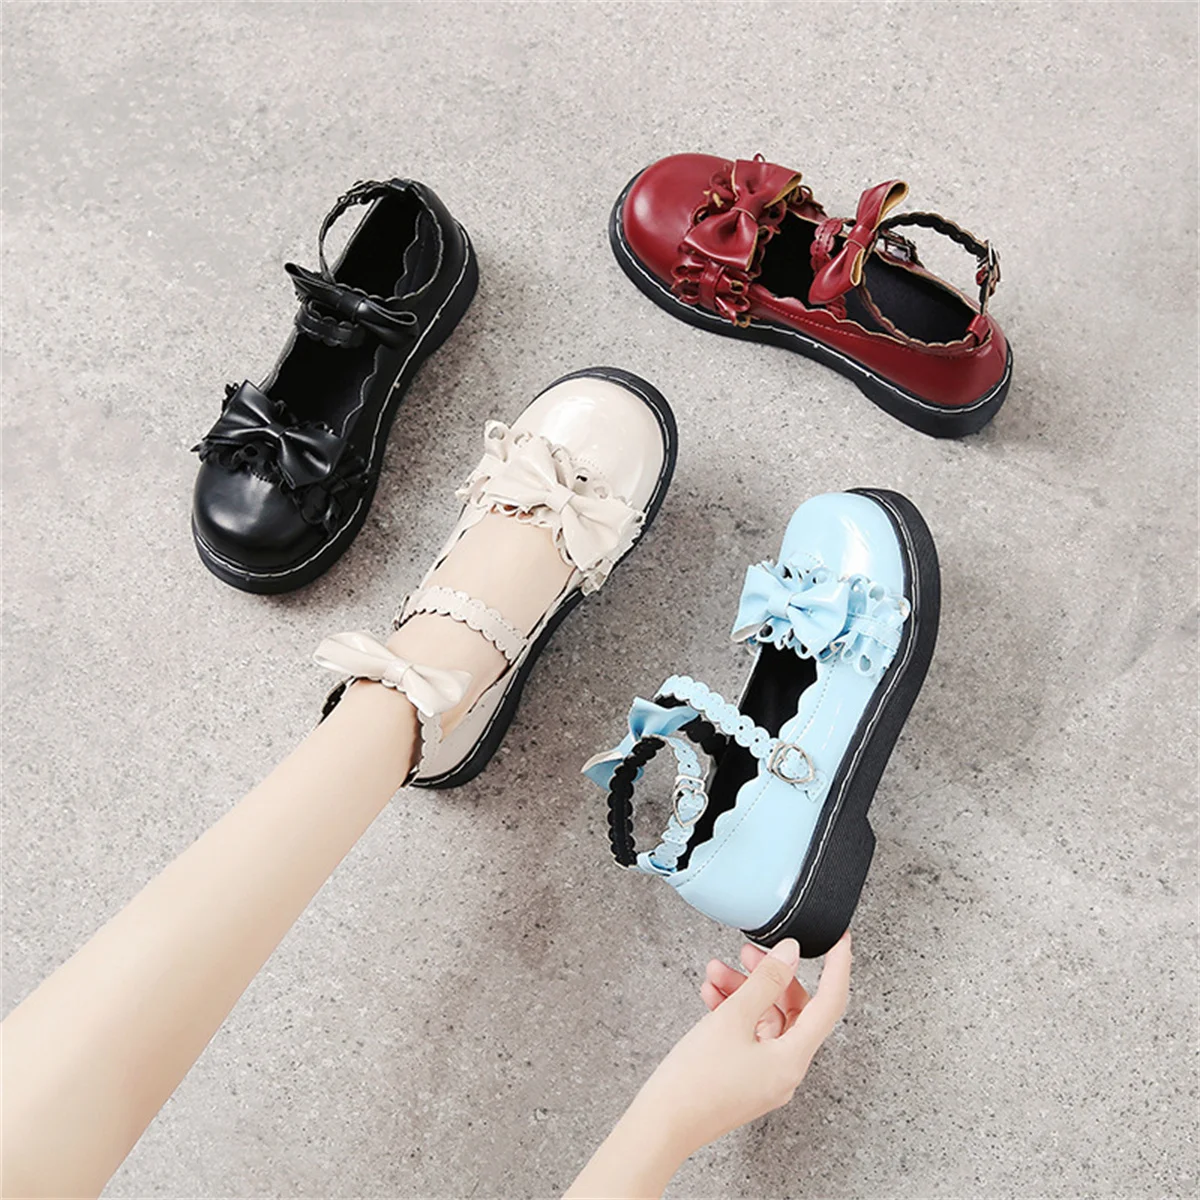 

Japanese College Cosplay Girls Shoes Jk Uniform Solid Color Round Head Sweet Bowknot Ruffle Vintage Elegant Fashion 3cm Shoes